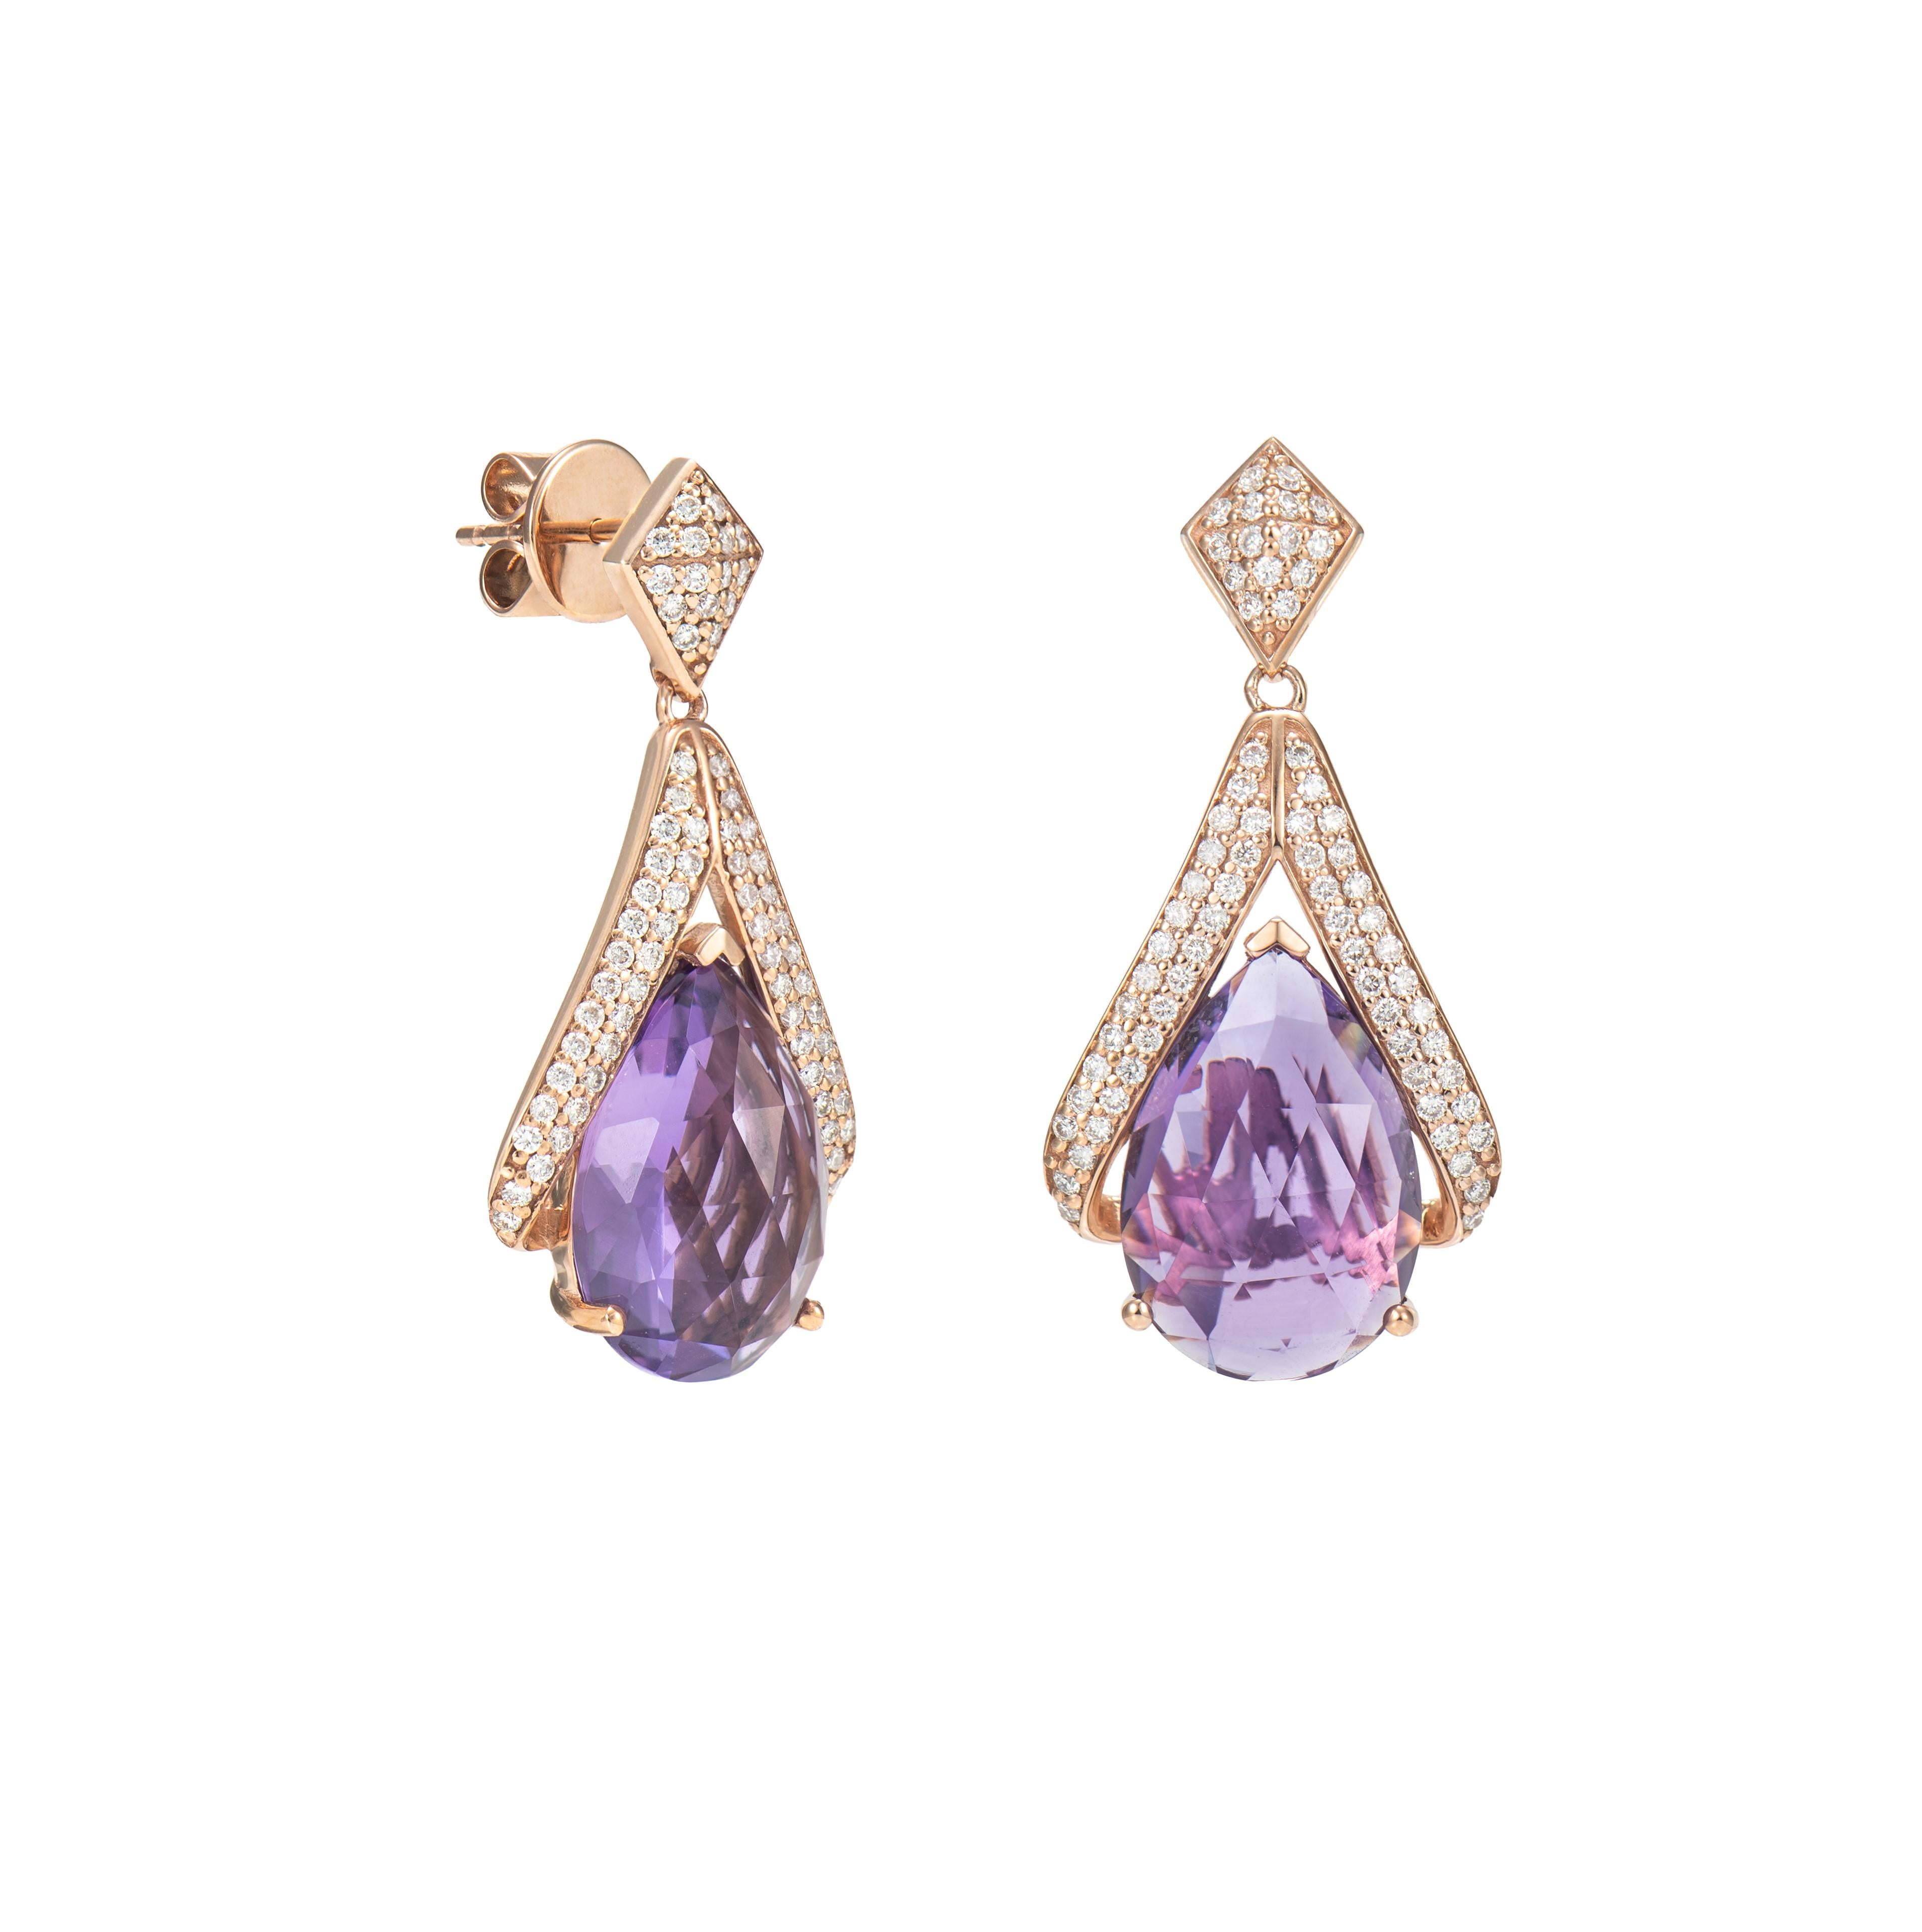 Glamorous Gemstones - Sunita Nahata started off her career as a gemstone trader, and this particular collection reflects her love for multi-colored semi-precious gemstones. The pieces in this collection are exclusively curated by Sunita to present